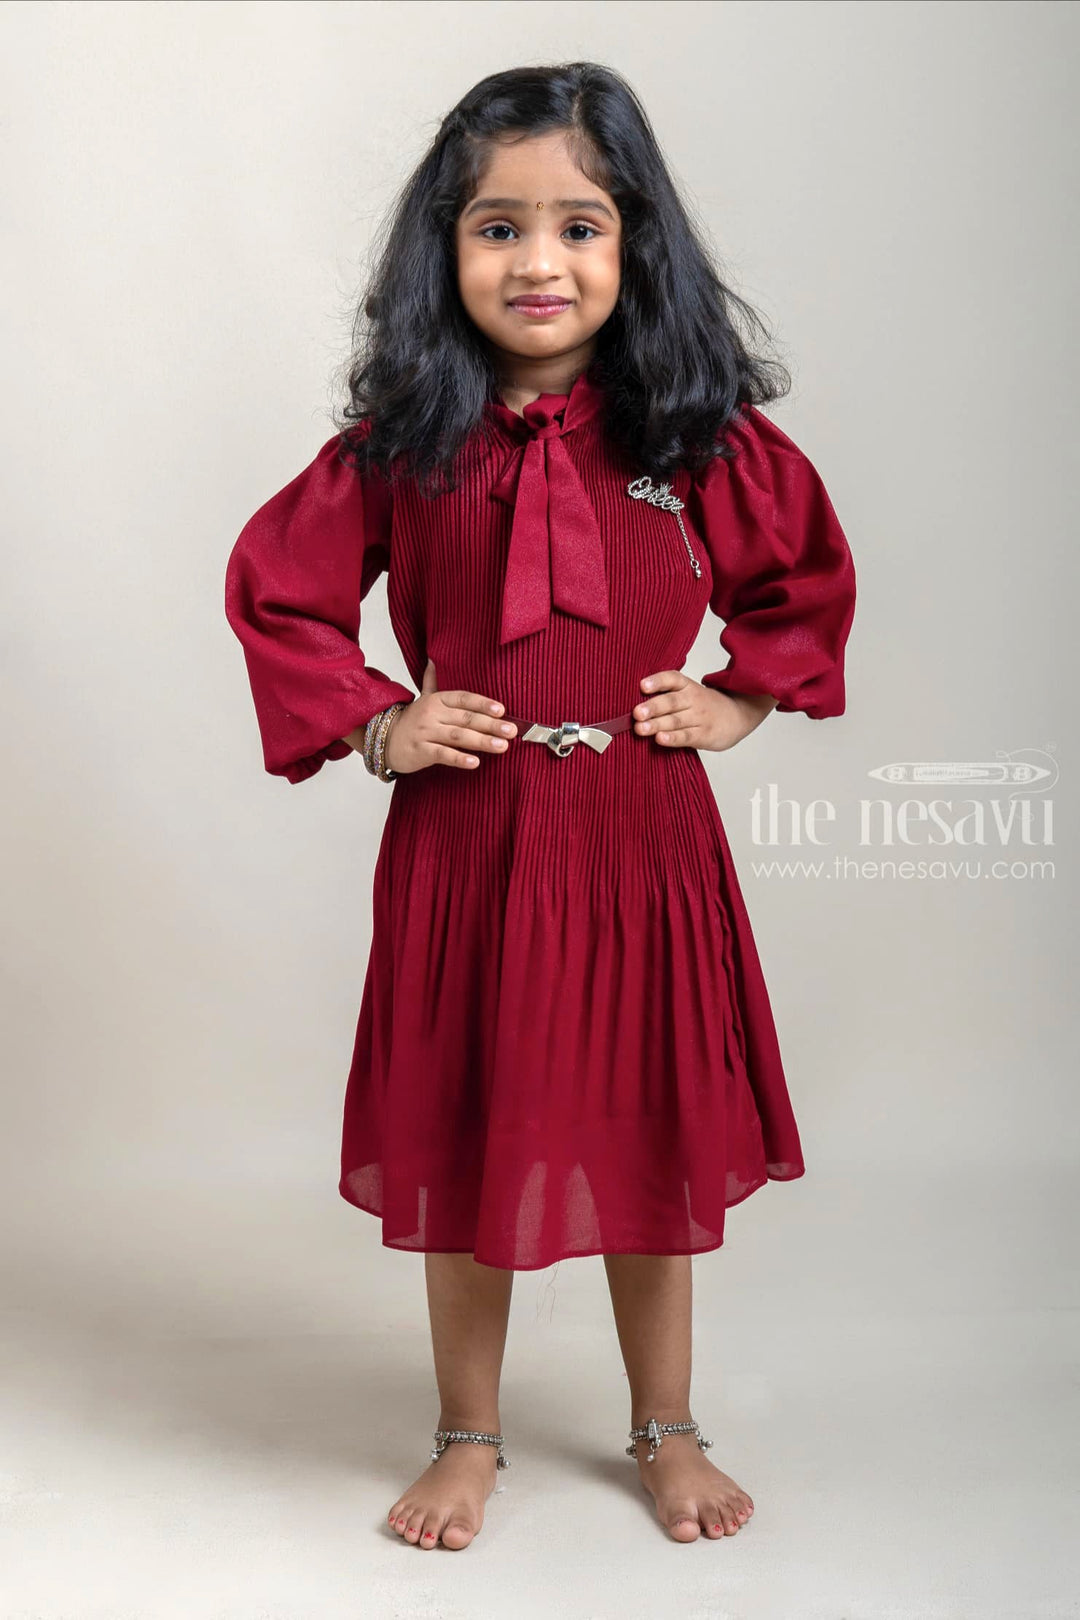 The Nesavu Girls Fancy Frock Small Pleated Maroon Frock with Balloon Sleeves for Baby Girls Nesavu 20 (3Y) / Maroon / Crepe GFC1068A-20 Small Pleated Maroon Frock with Balloon Sleeves for Baby Girls | The Nesavu